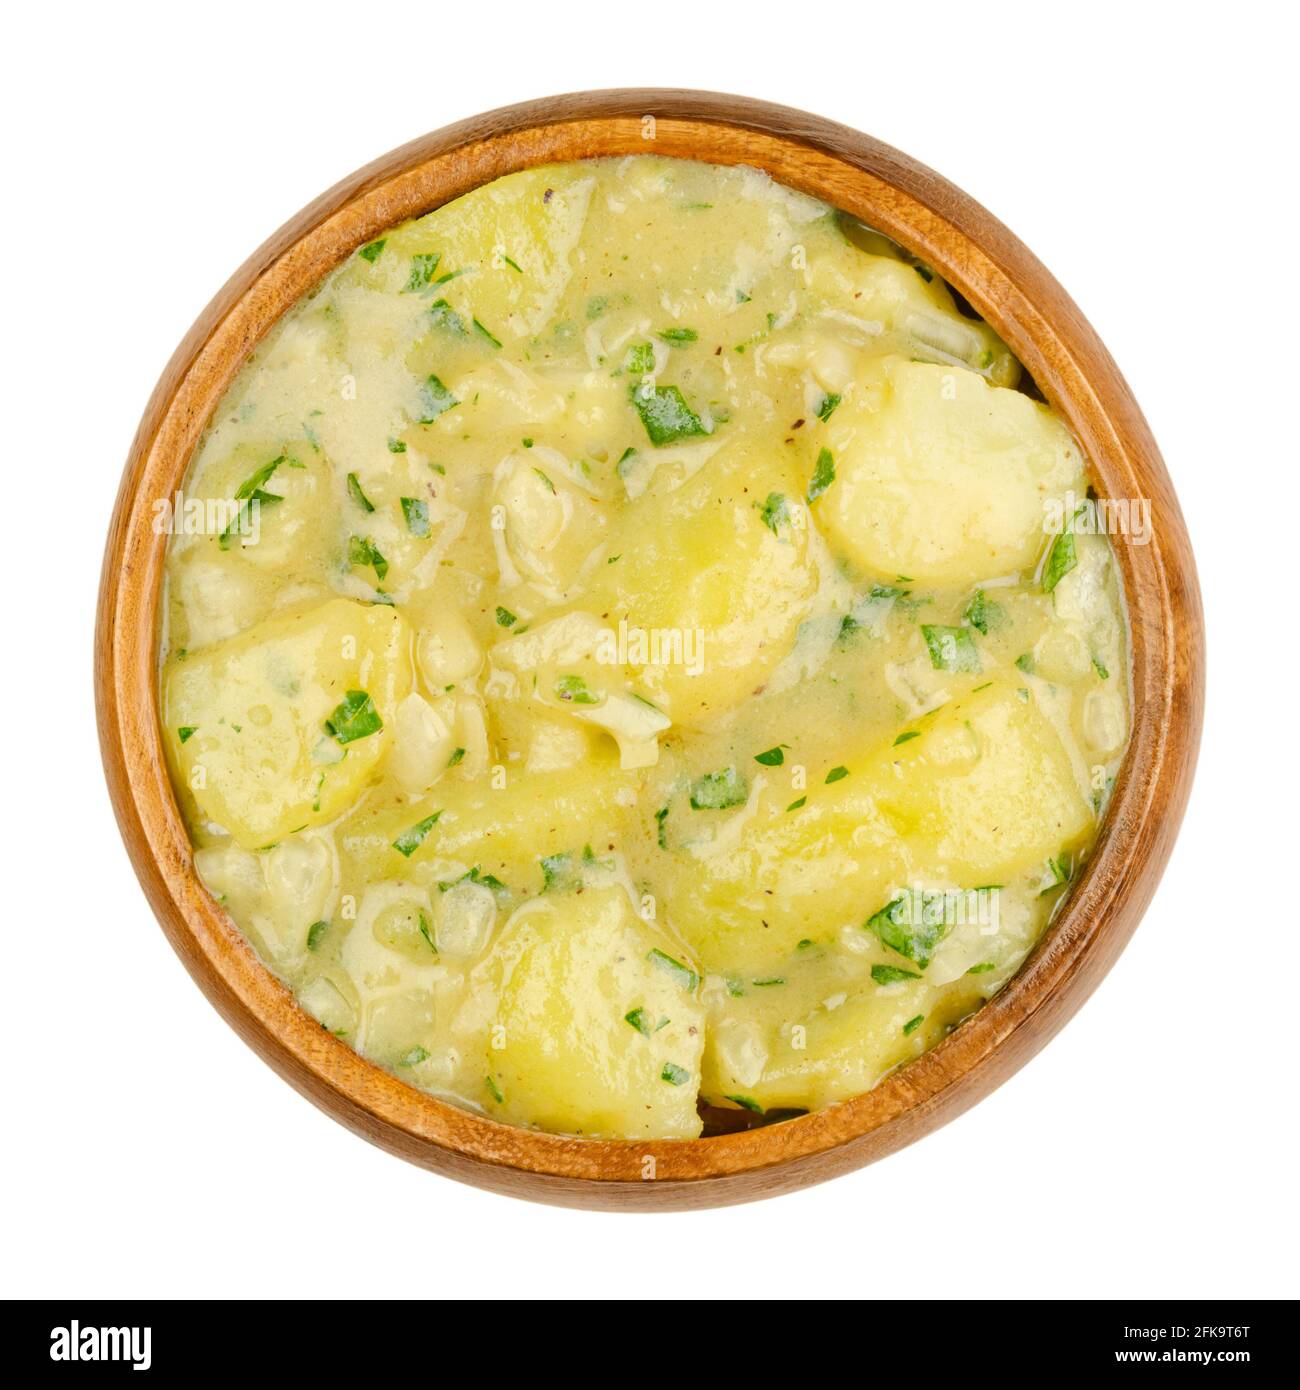 Potato salad with oil and vinegar in wooden bowl. Traditional German and Austrian side dish made from boiled potatoes, oil, vinegar, onion and parsley. Stock Photo